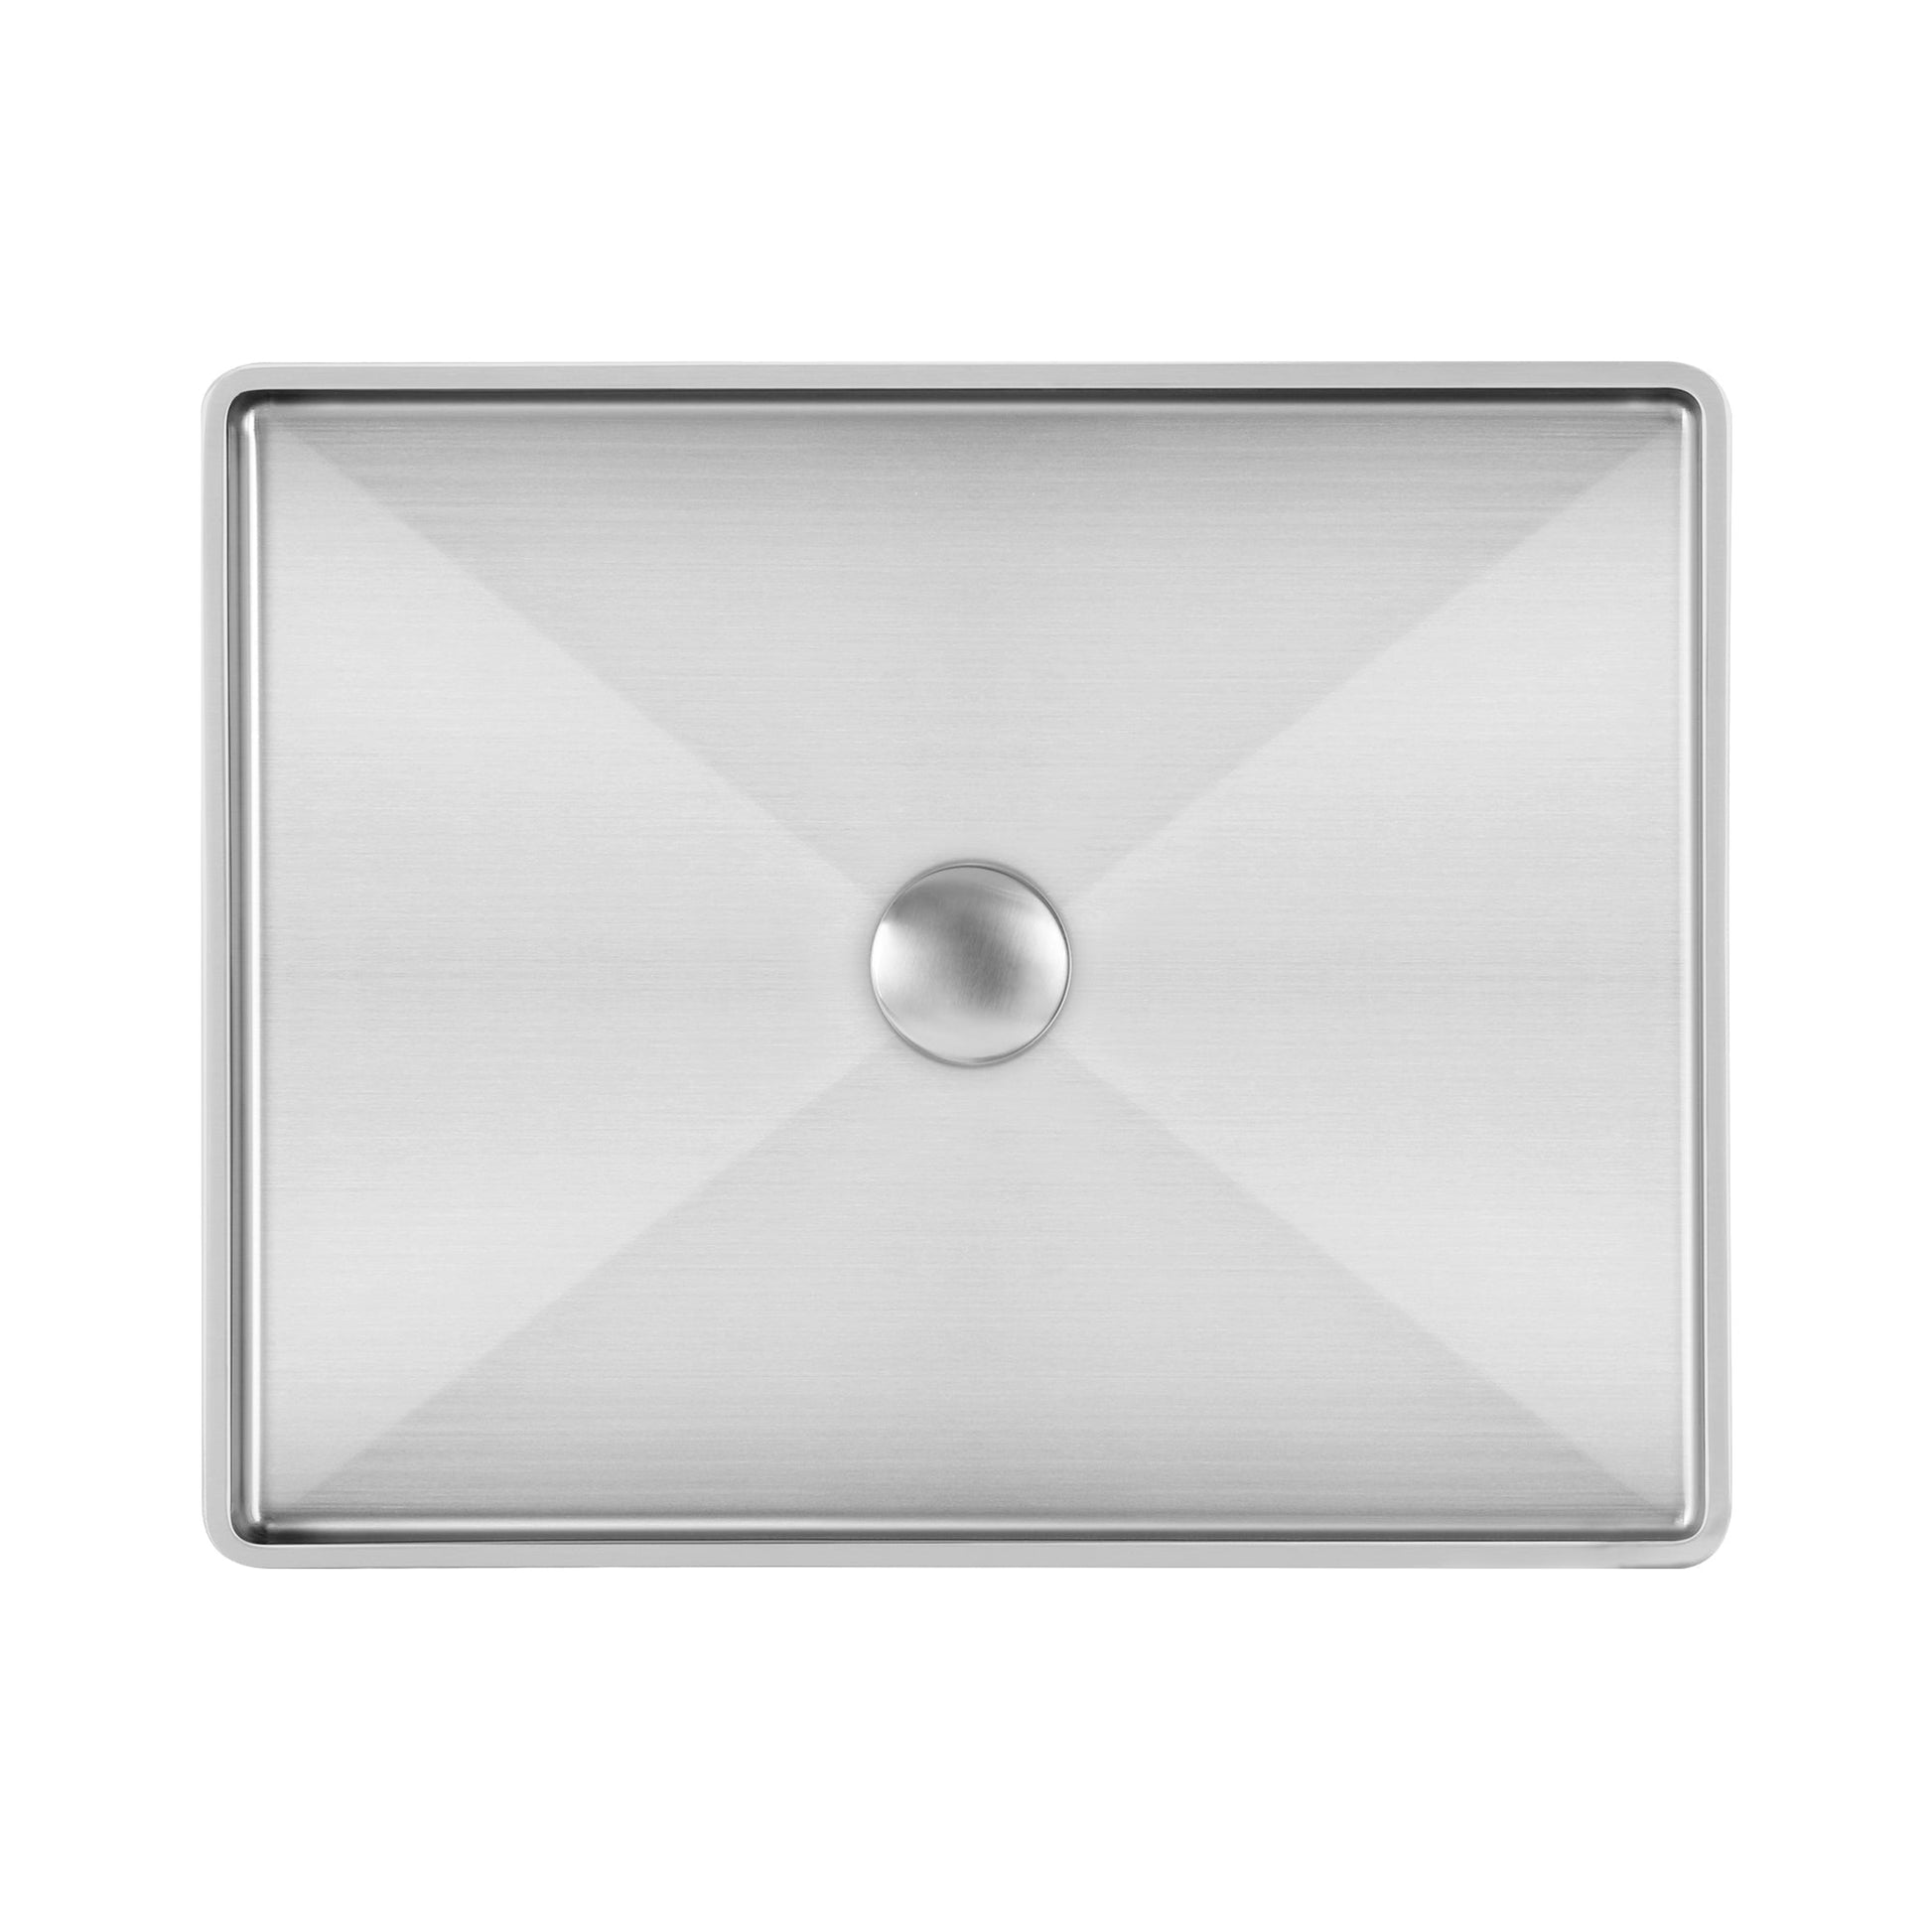 Whitehaus Noah Plus WHNPL1578-BSS Rectangular Brushed Stainless Steel Above Mount Basin Set With Center Drain